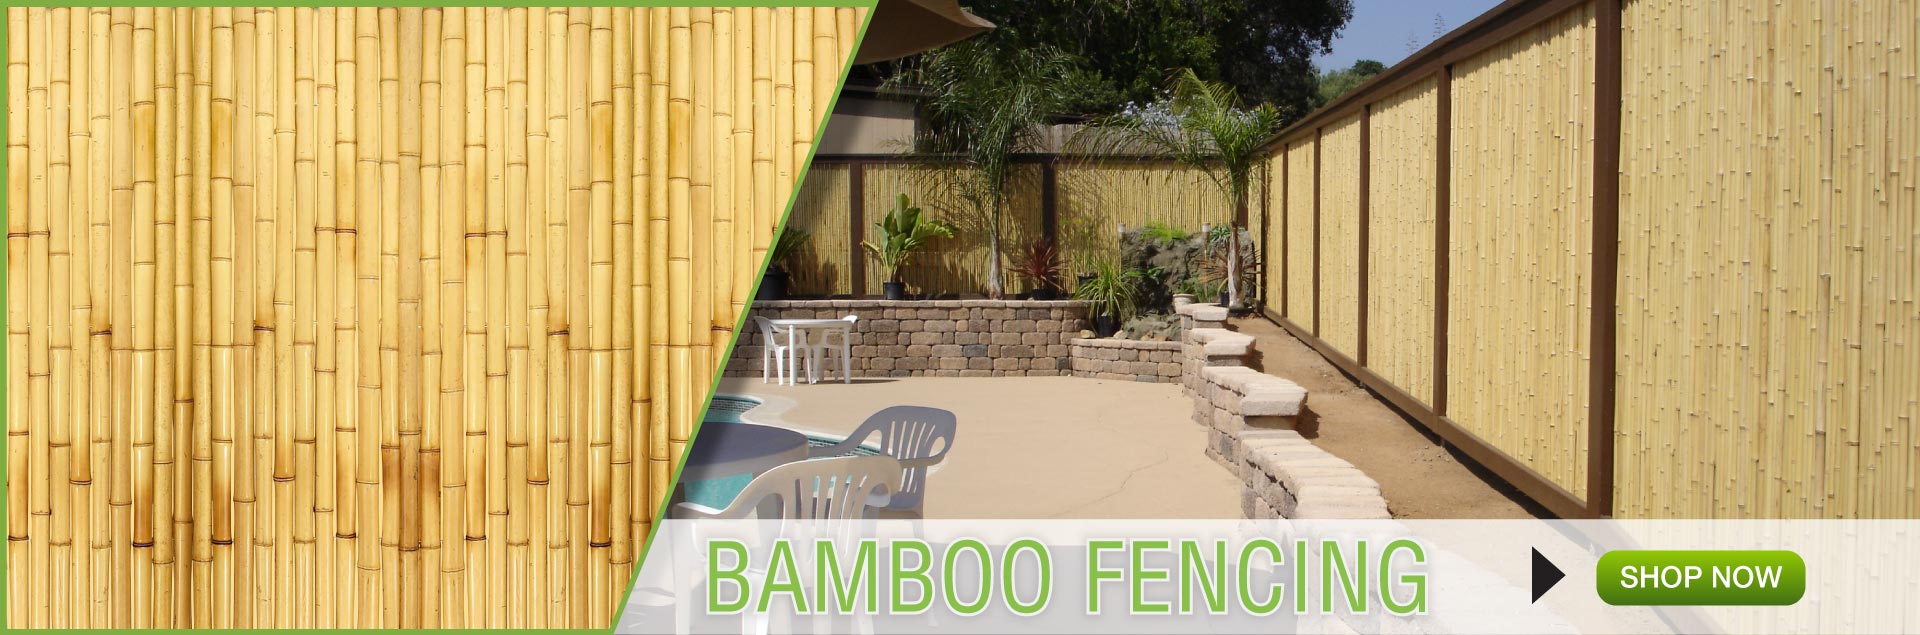 bamboo fencing online